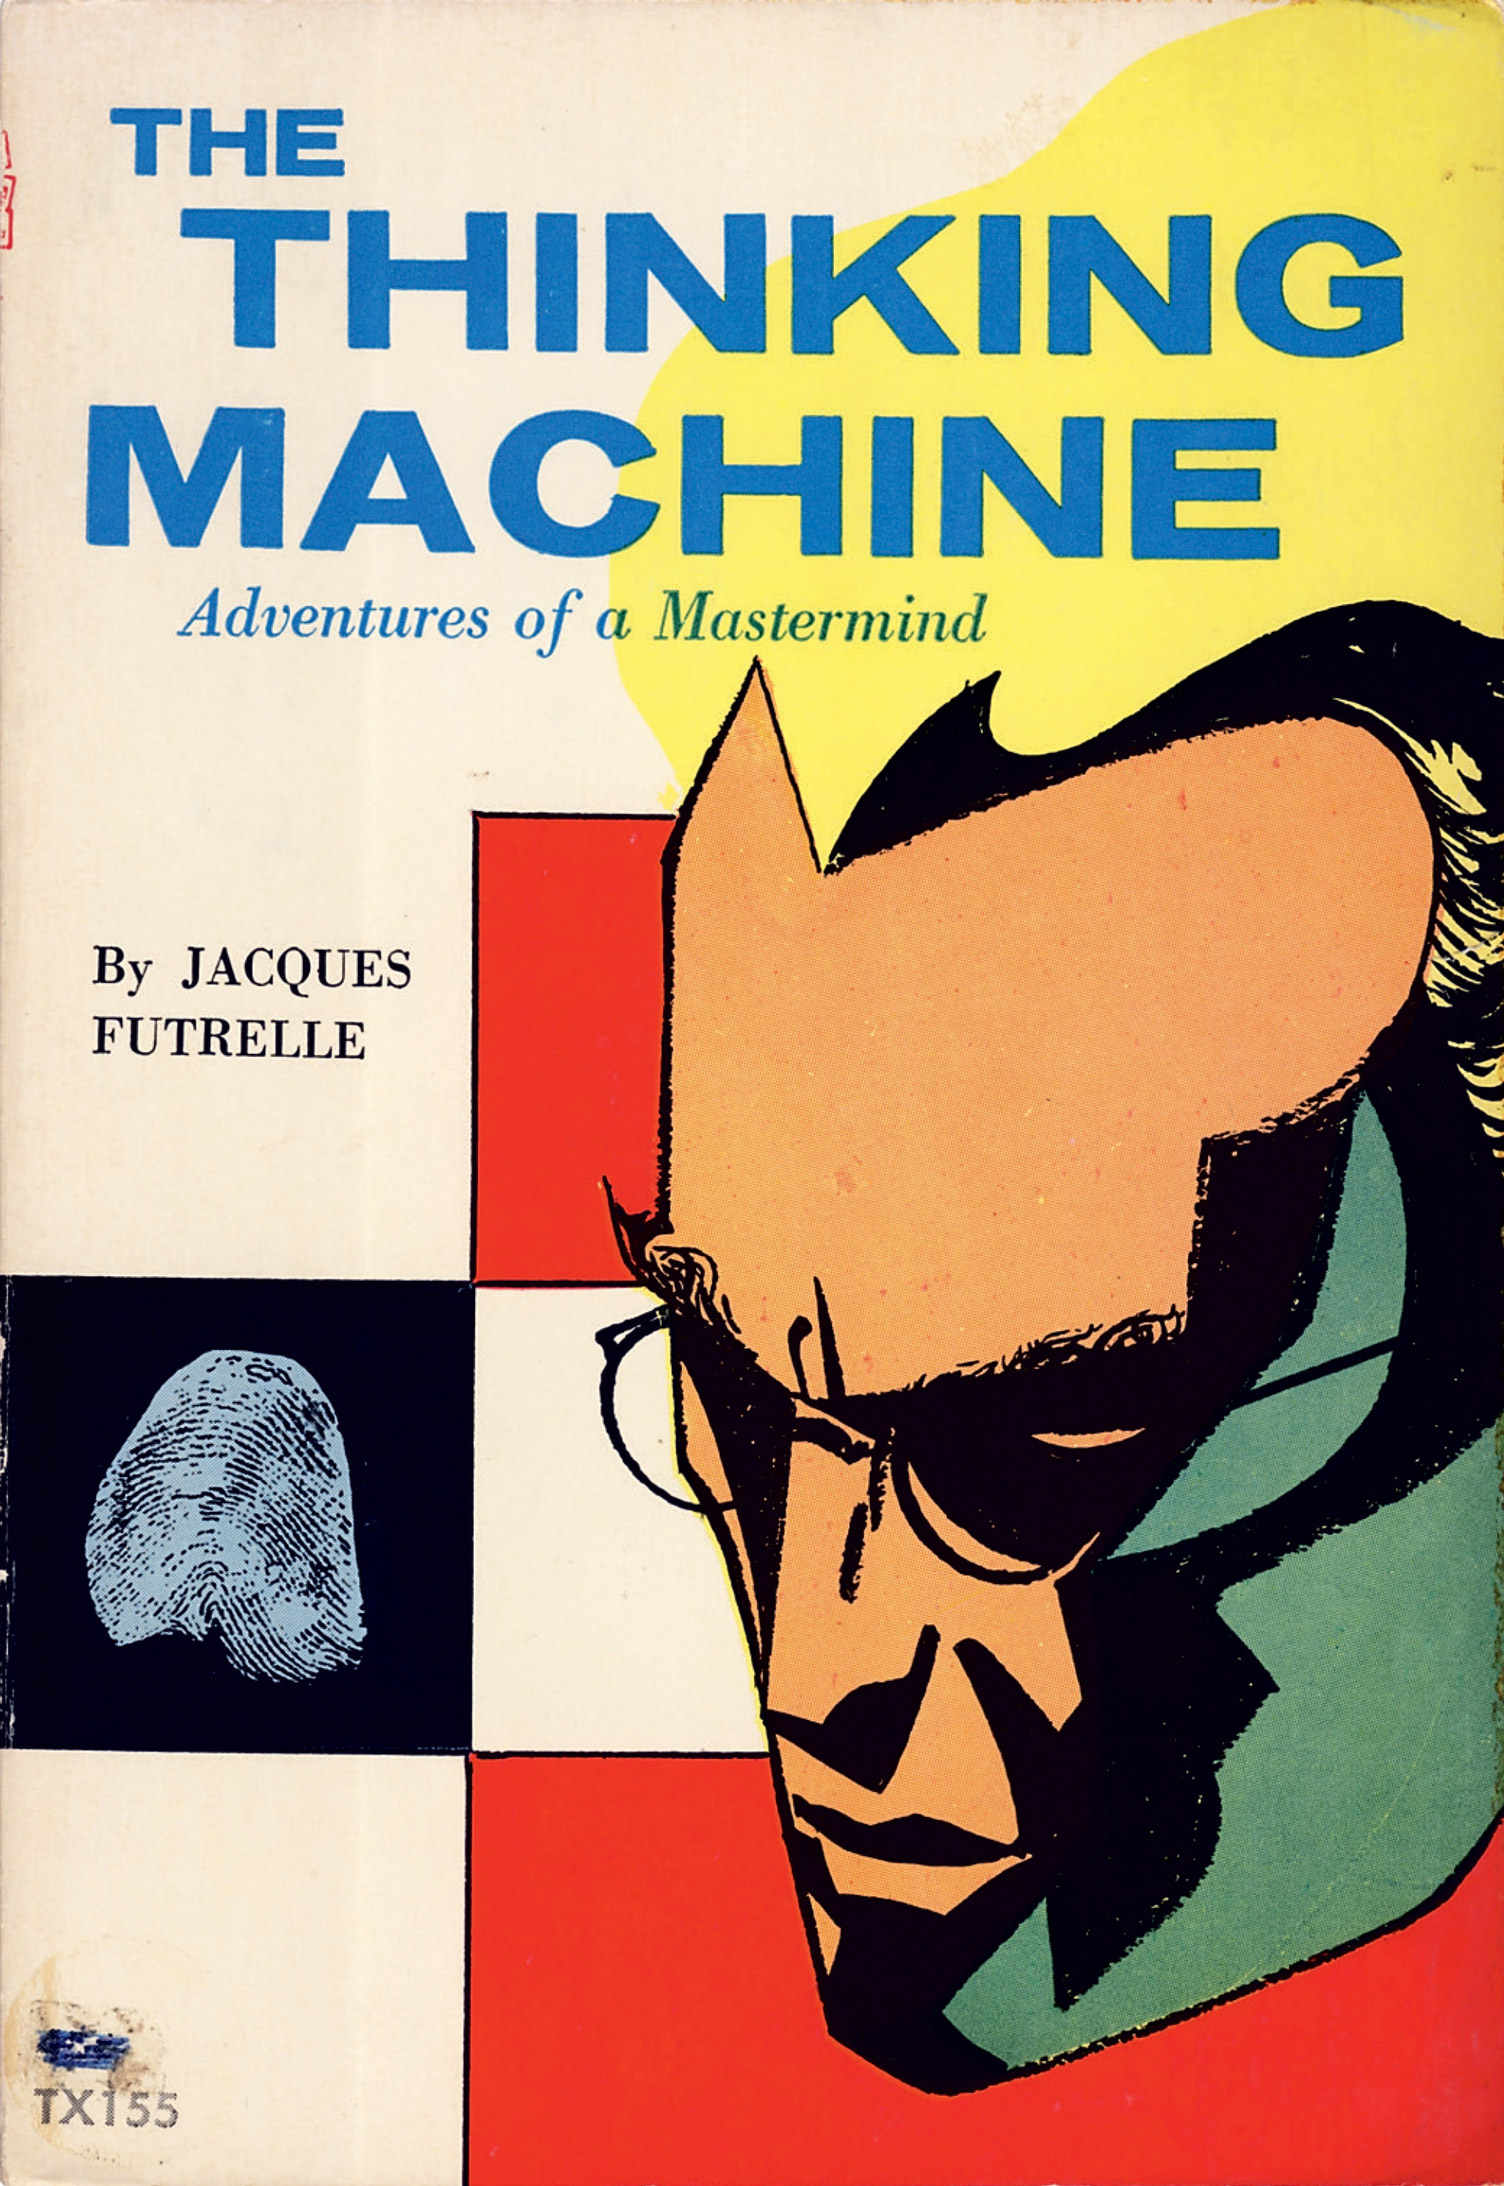 In 1905, author Jacques Futrelle debuted master logician Professor Augustus S. F. X. Van Dusen, PhD, LLD, FRS, MD, MDS, nicknamed “The Thinking Machine.”